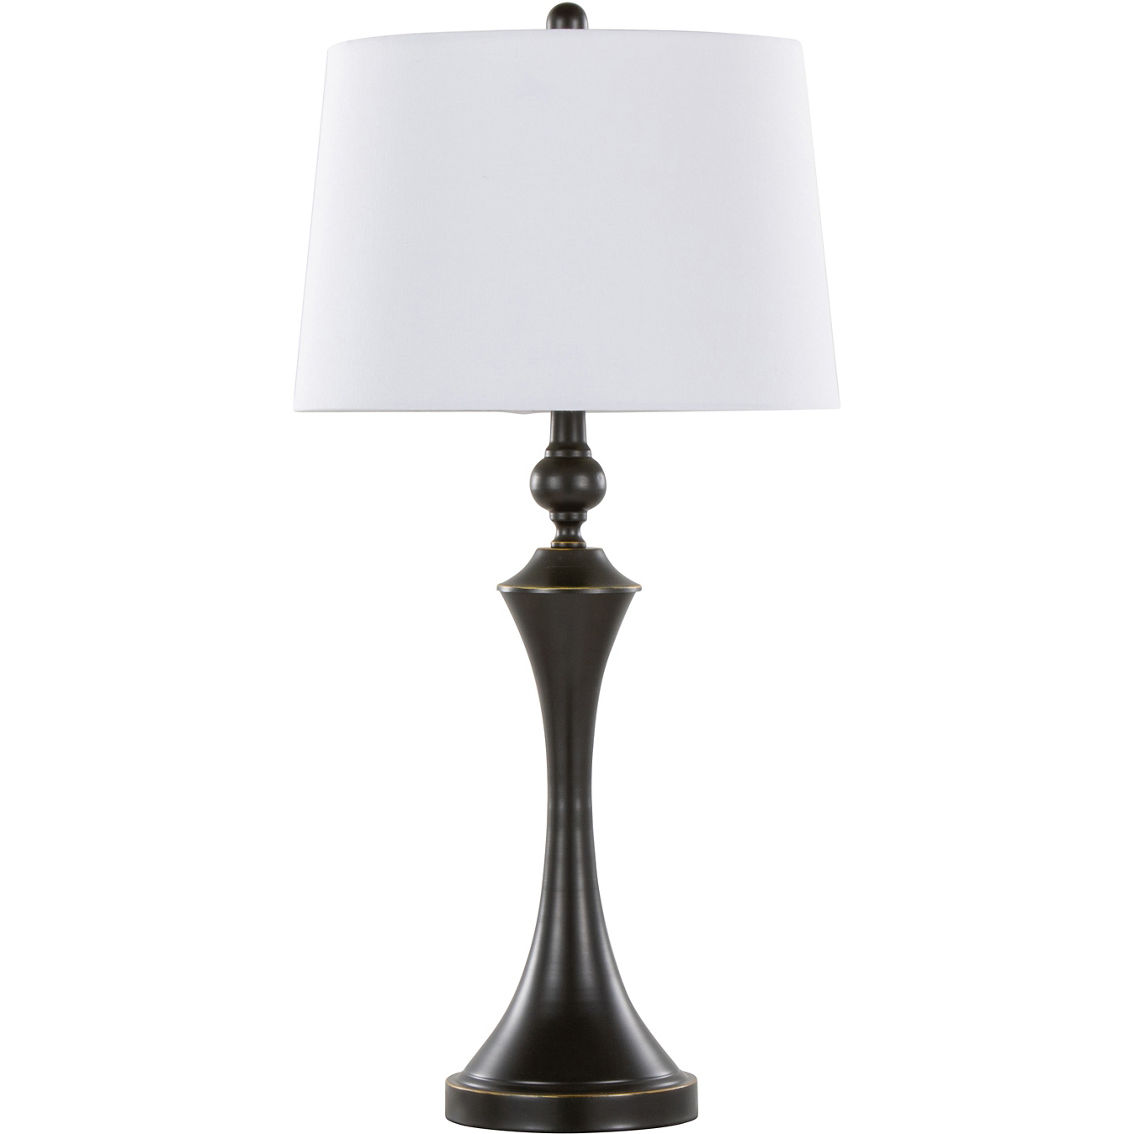 LumiSource Flint 30.75 in. Metal Table Lamp with USB 2 pc. Set - Image 2 of 10